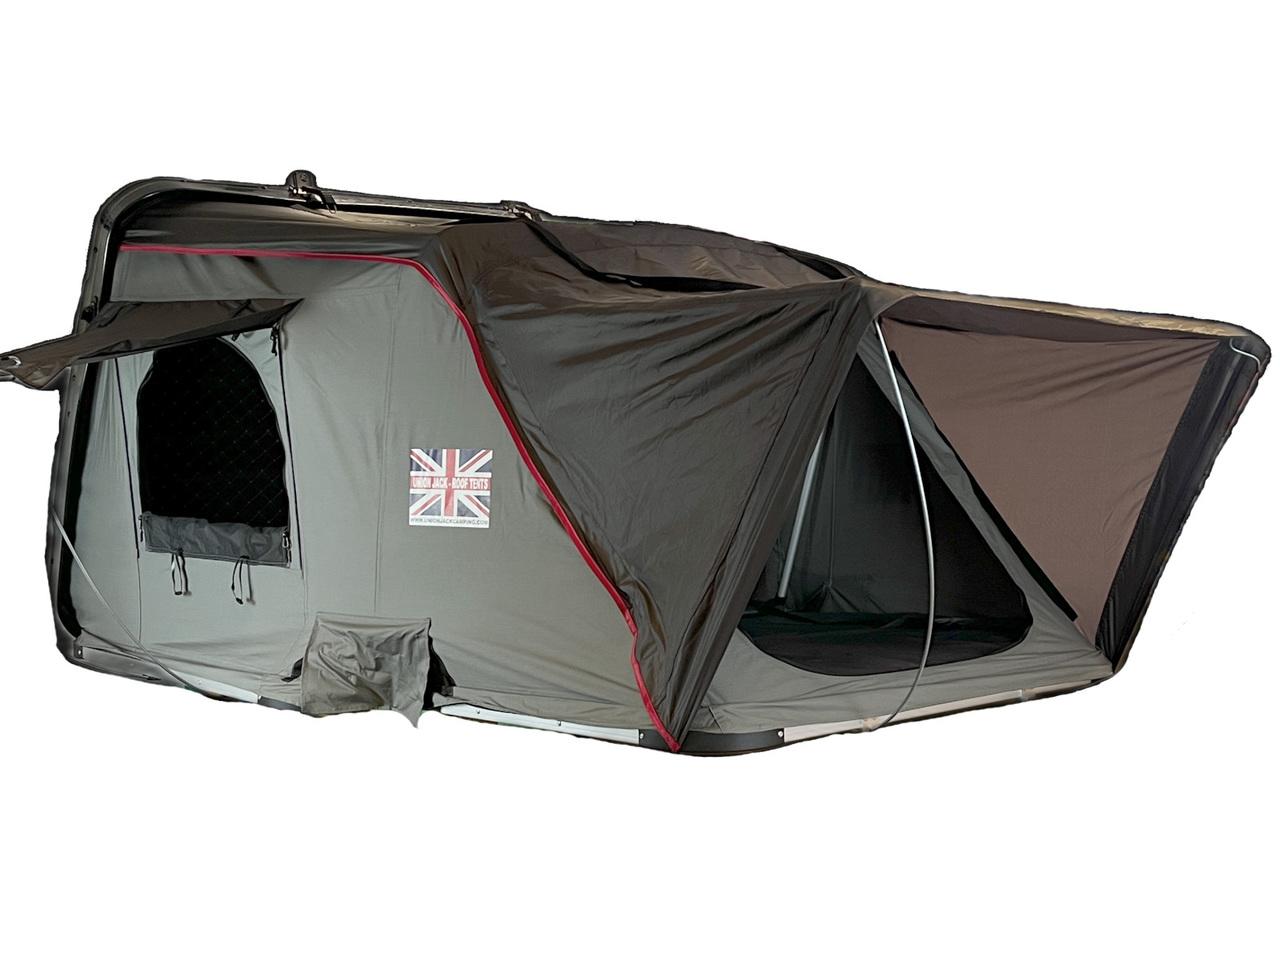 Union Jack Camping Roof Top Tent Bunk RoofTent